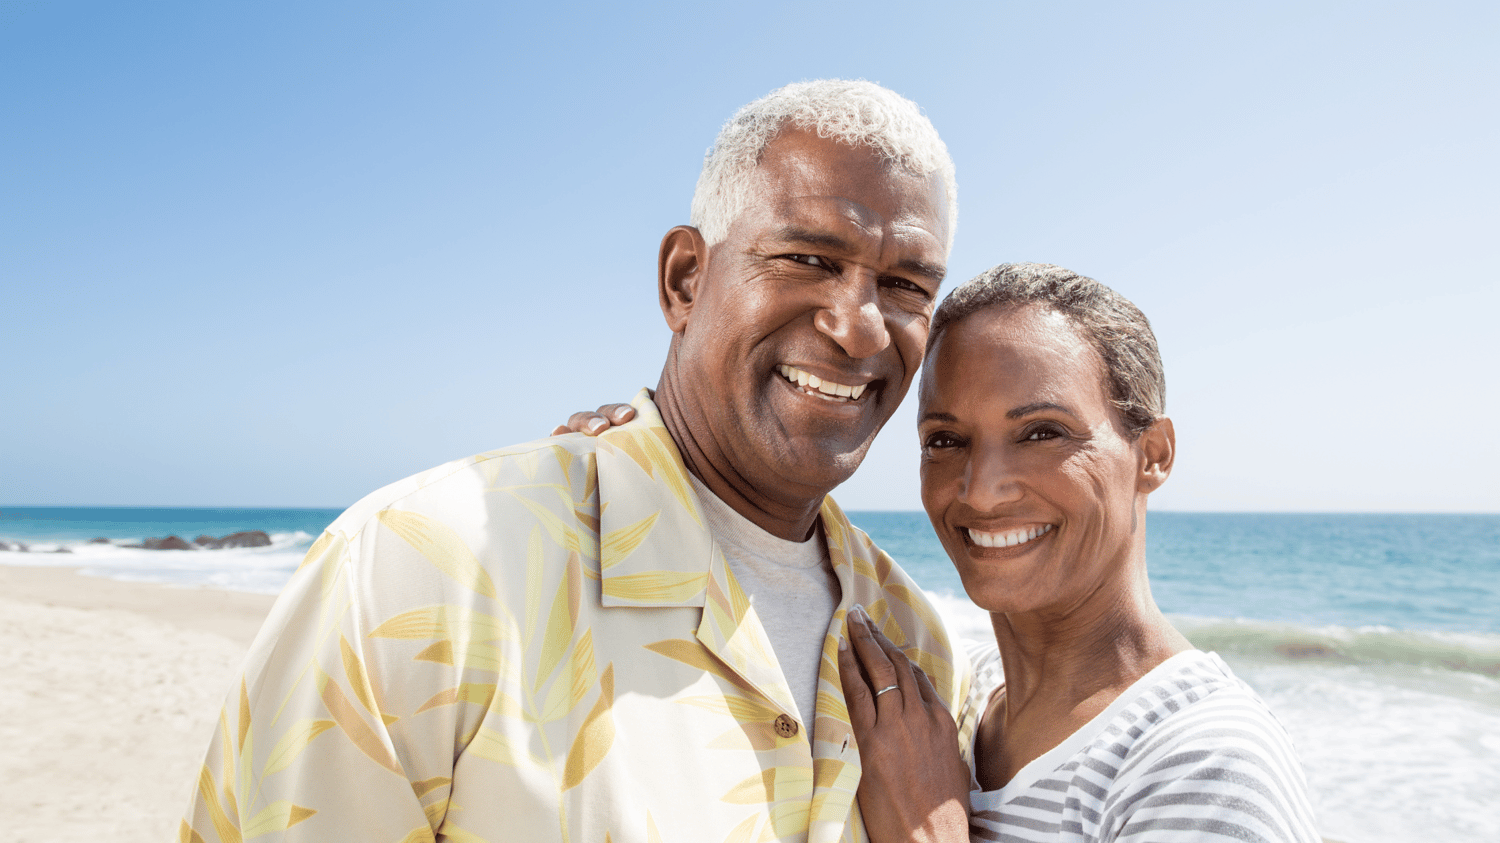 FIXED INDEXED ANNUITIES: BALANCING GROWTH AND PROTECTION FOR YOUR RETIREMENT